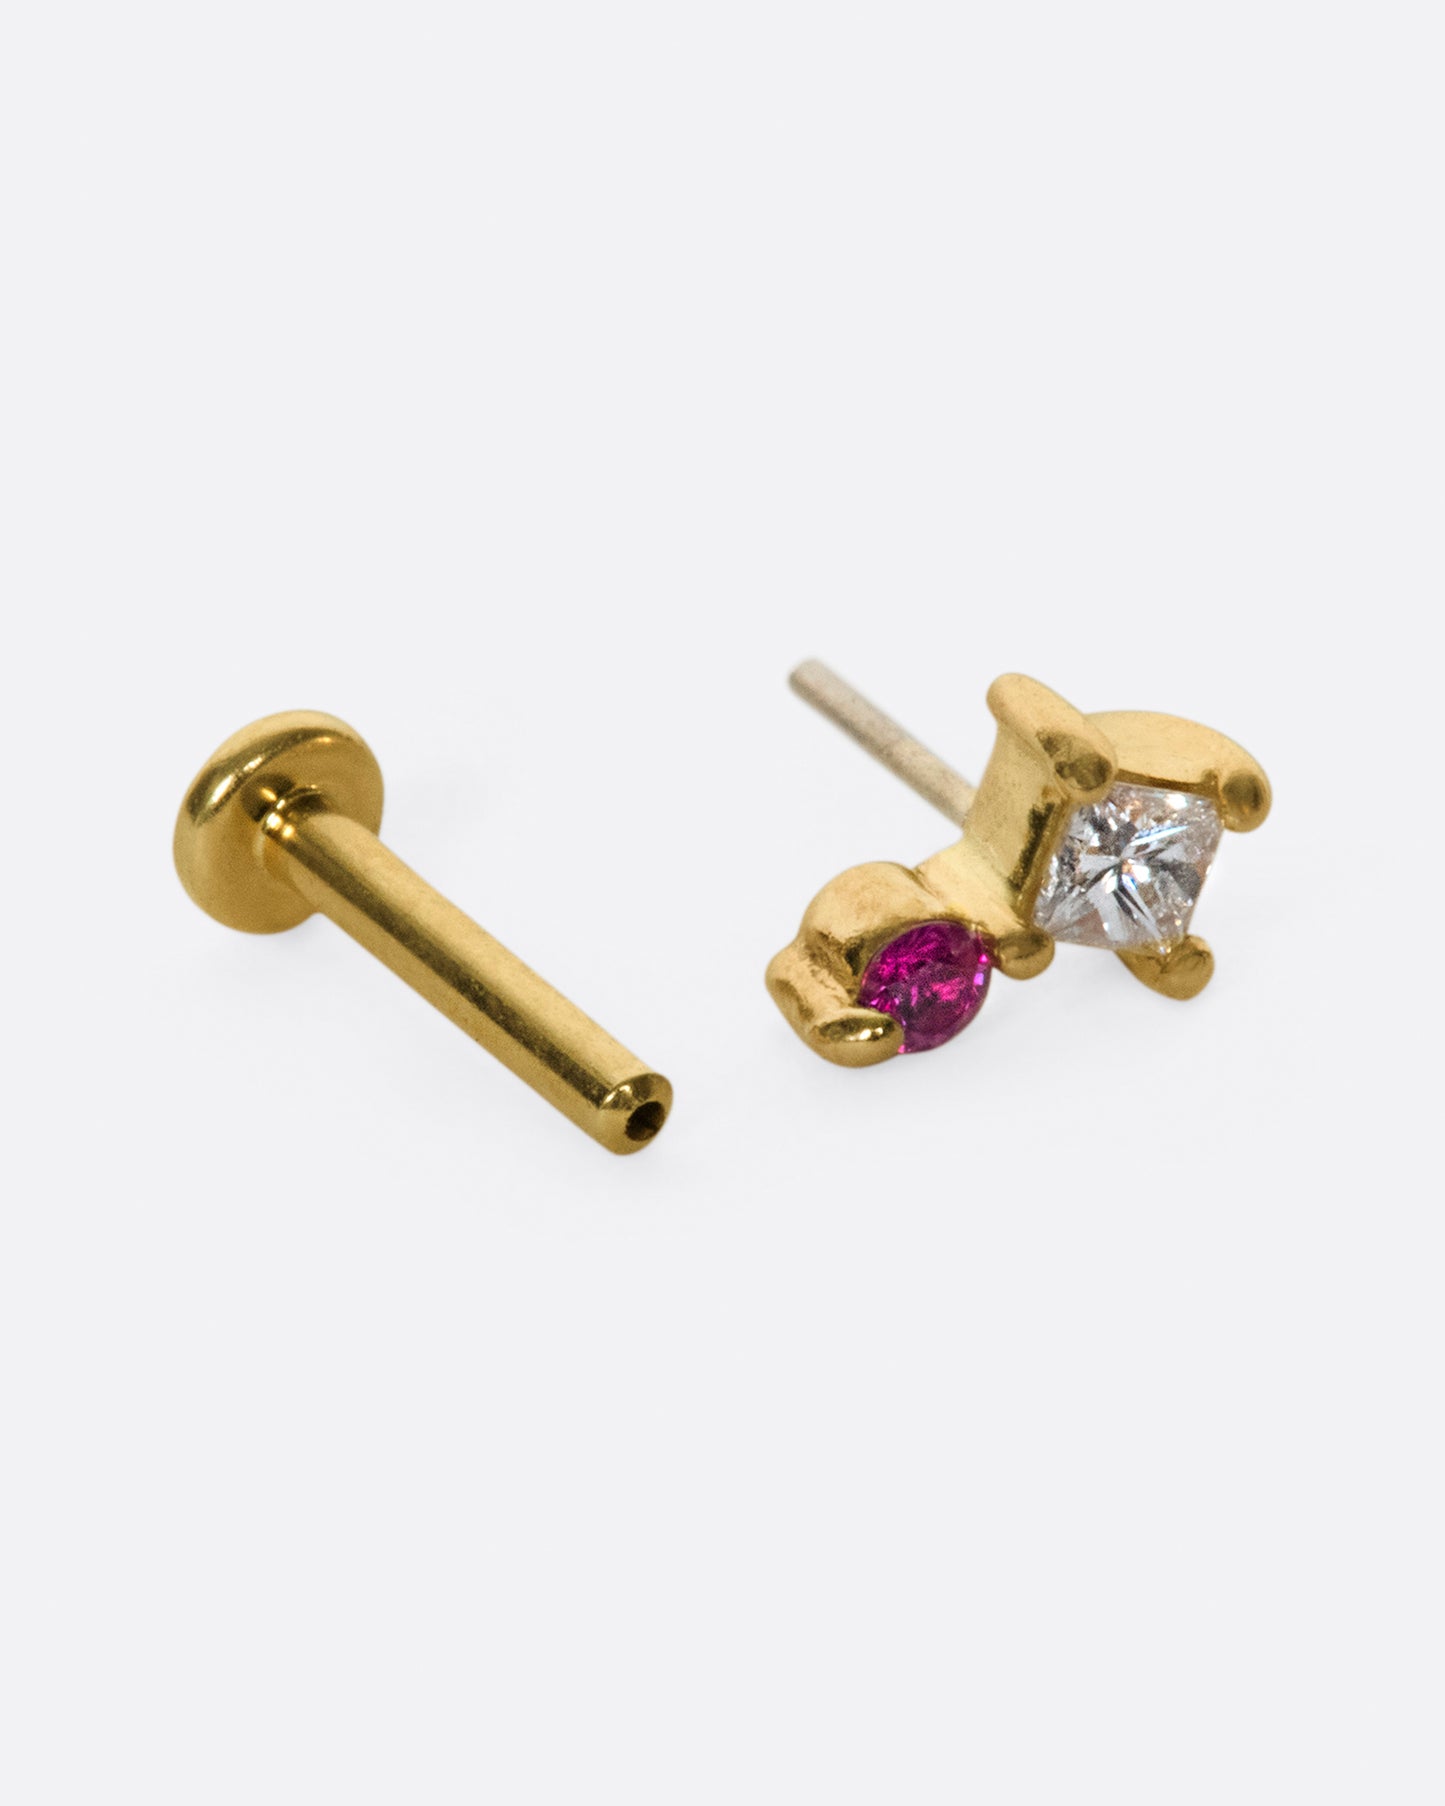 A princess cut diamond stacked with a round pink sapphire; this earring front looks great no matter which direction it's facing.